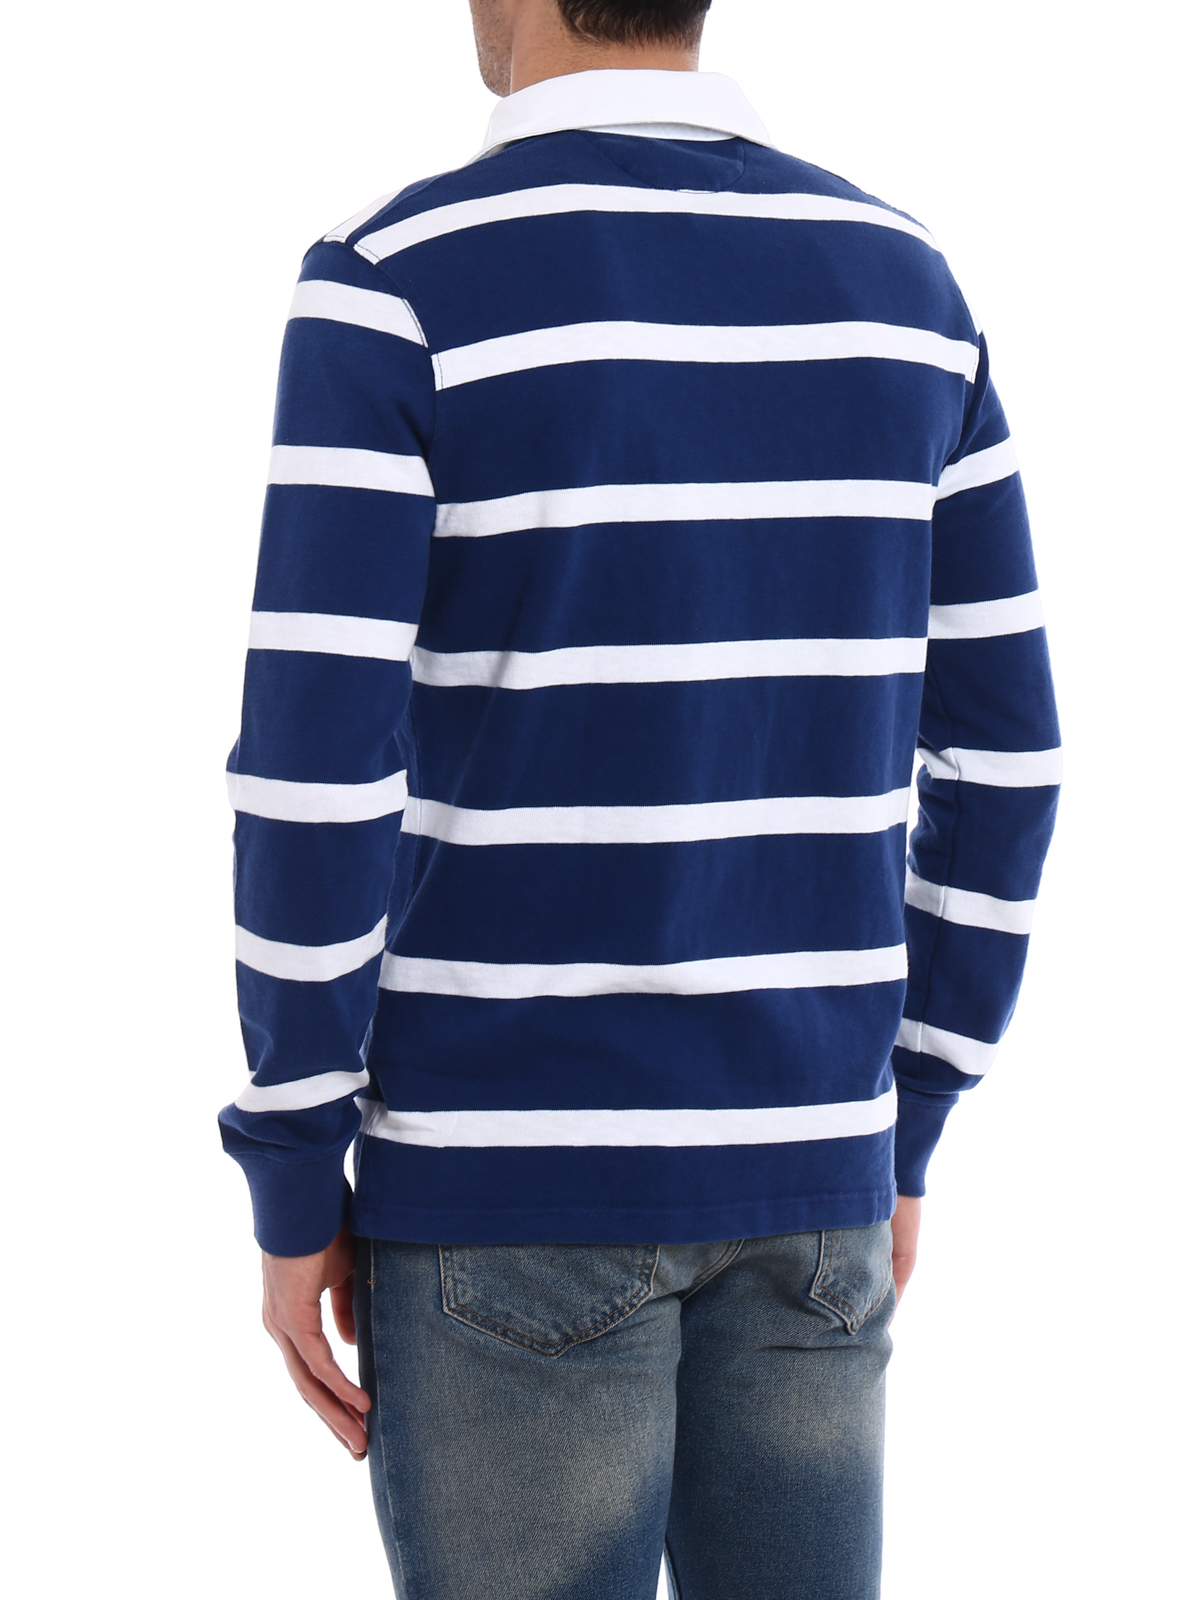 Polo shirts Polo Ralph Lauren - Iconic Rugby striped polo shirt